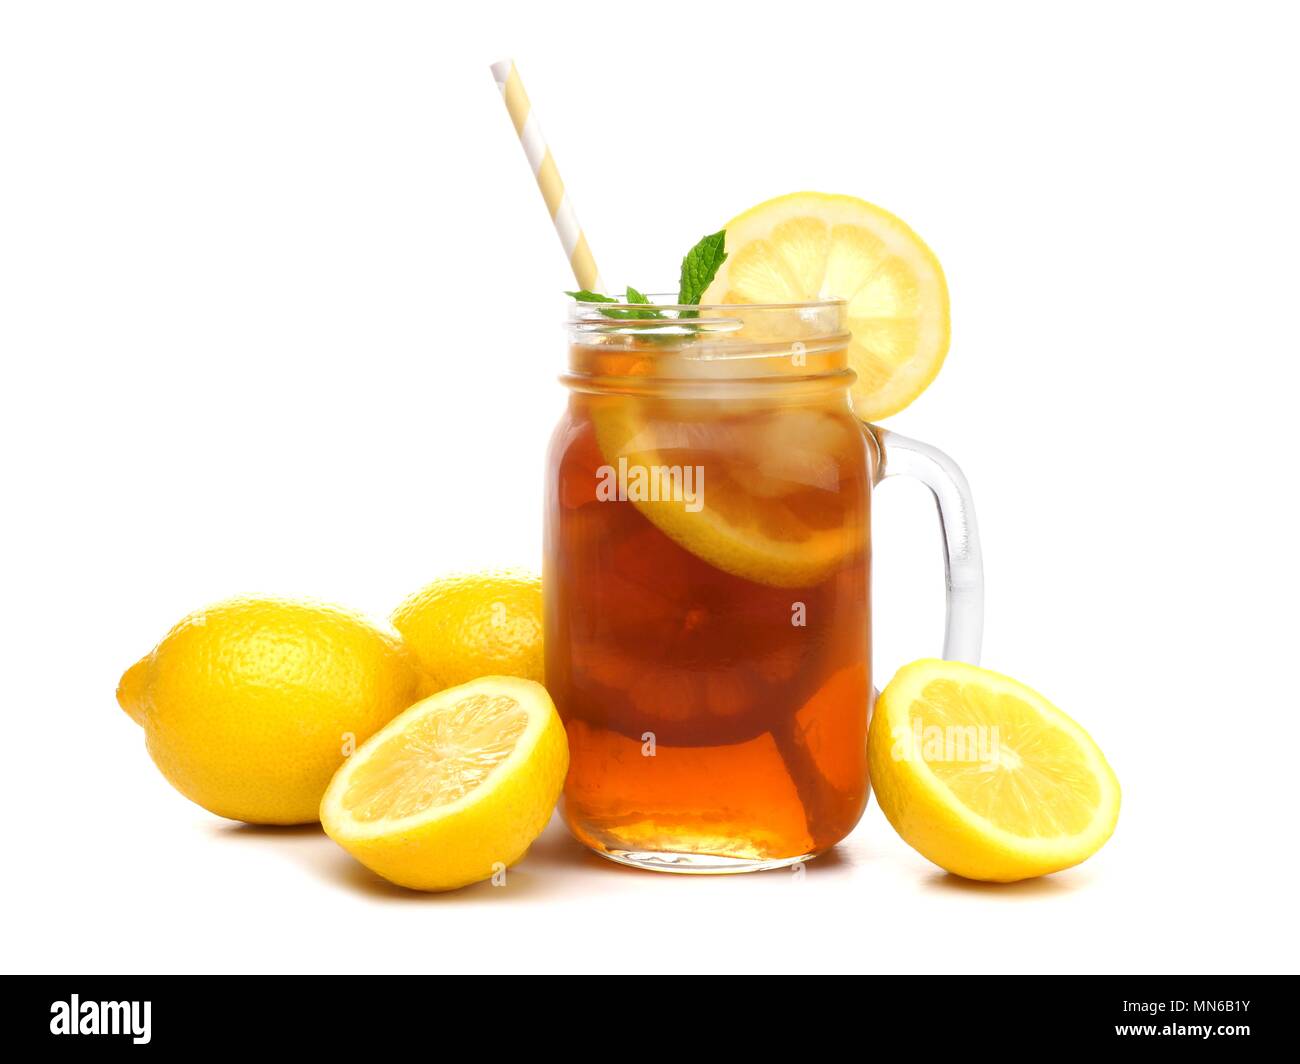 Mason jar glass of iced tea with lemons and straw isolated on a white background Stock Photo